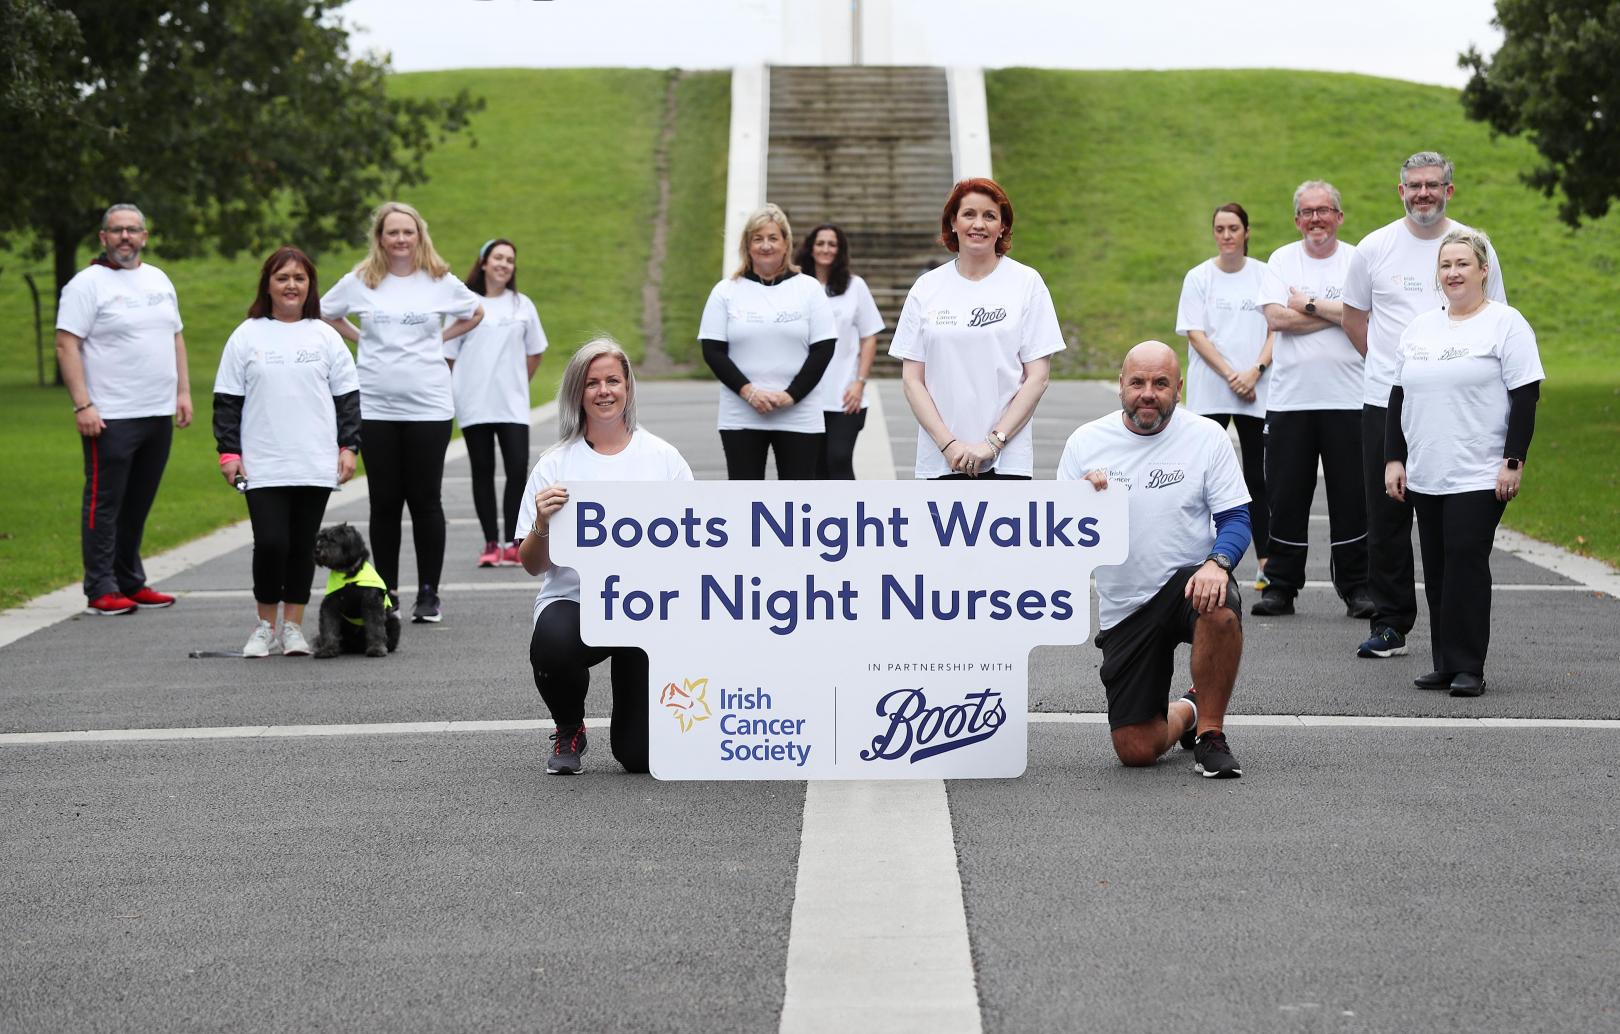 Boots and Irish Cancer Society volunteers holding a sing to promote Boots Night Walks for Night Nurses